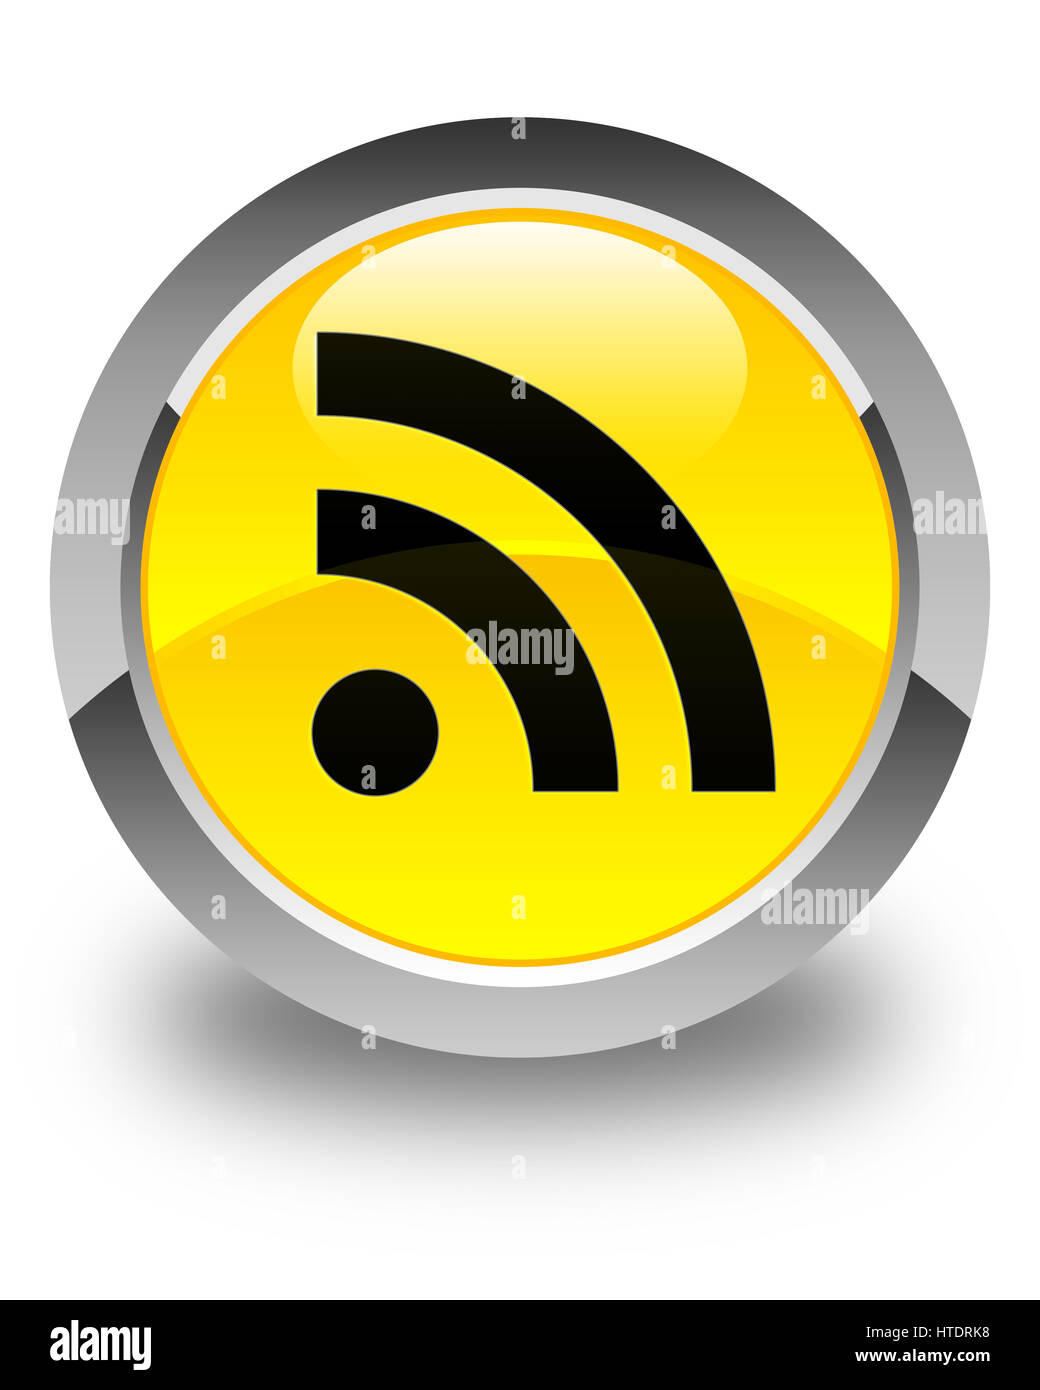 RSS icon isolated on glossy yellow round button abstract illustration Stock Photo